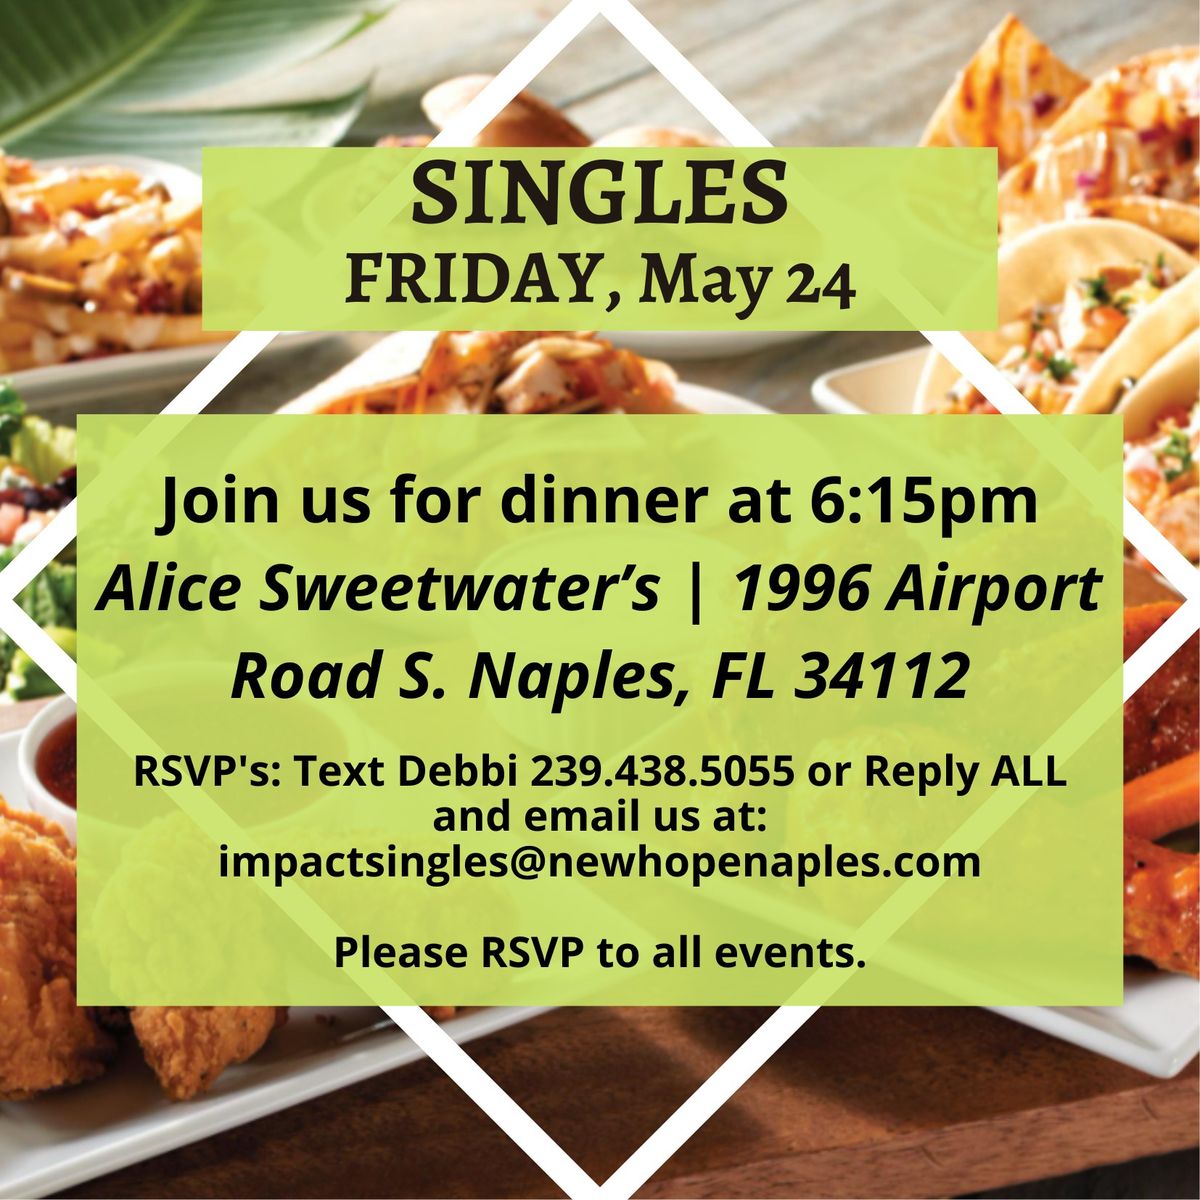 Singles - Dinner at Alice Sweetwater's